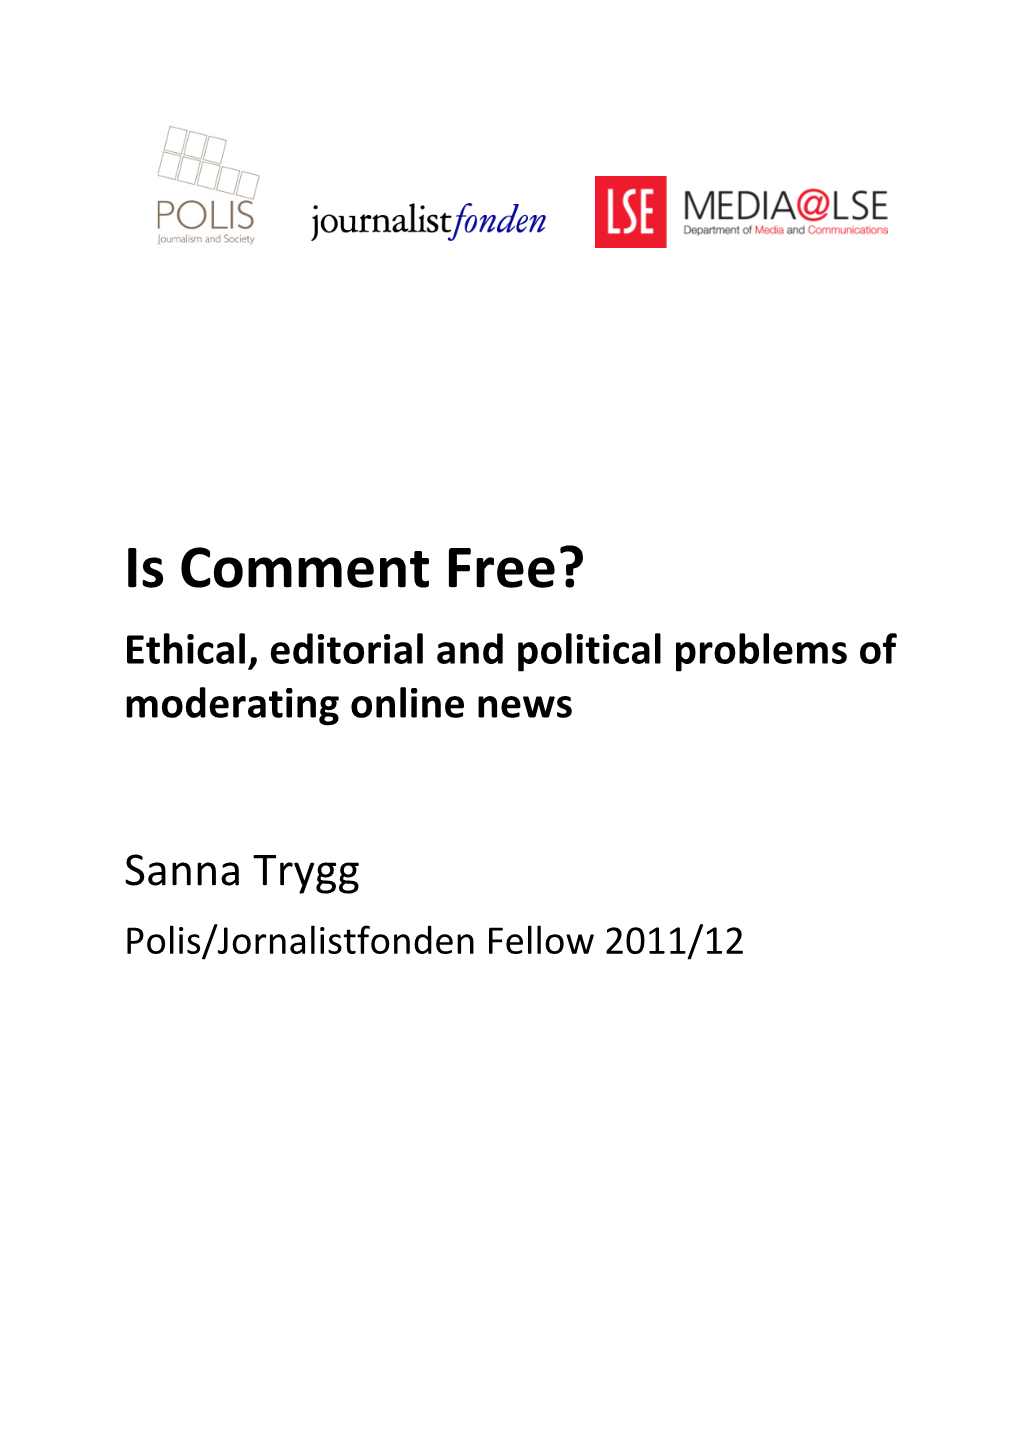 Is Comment Free? Ethical, Editorial and Political Problems of Moderating Online News